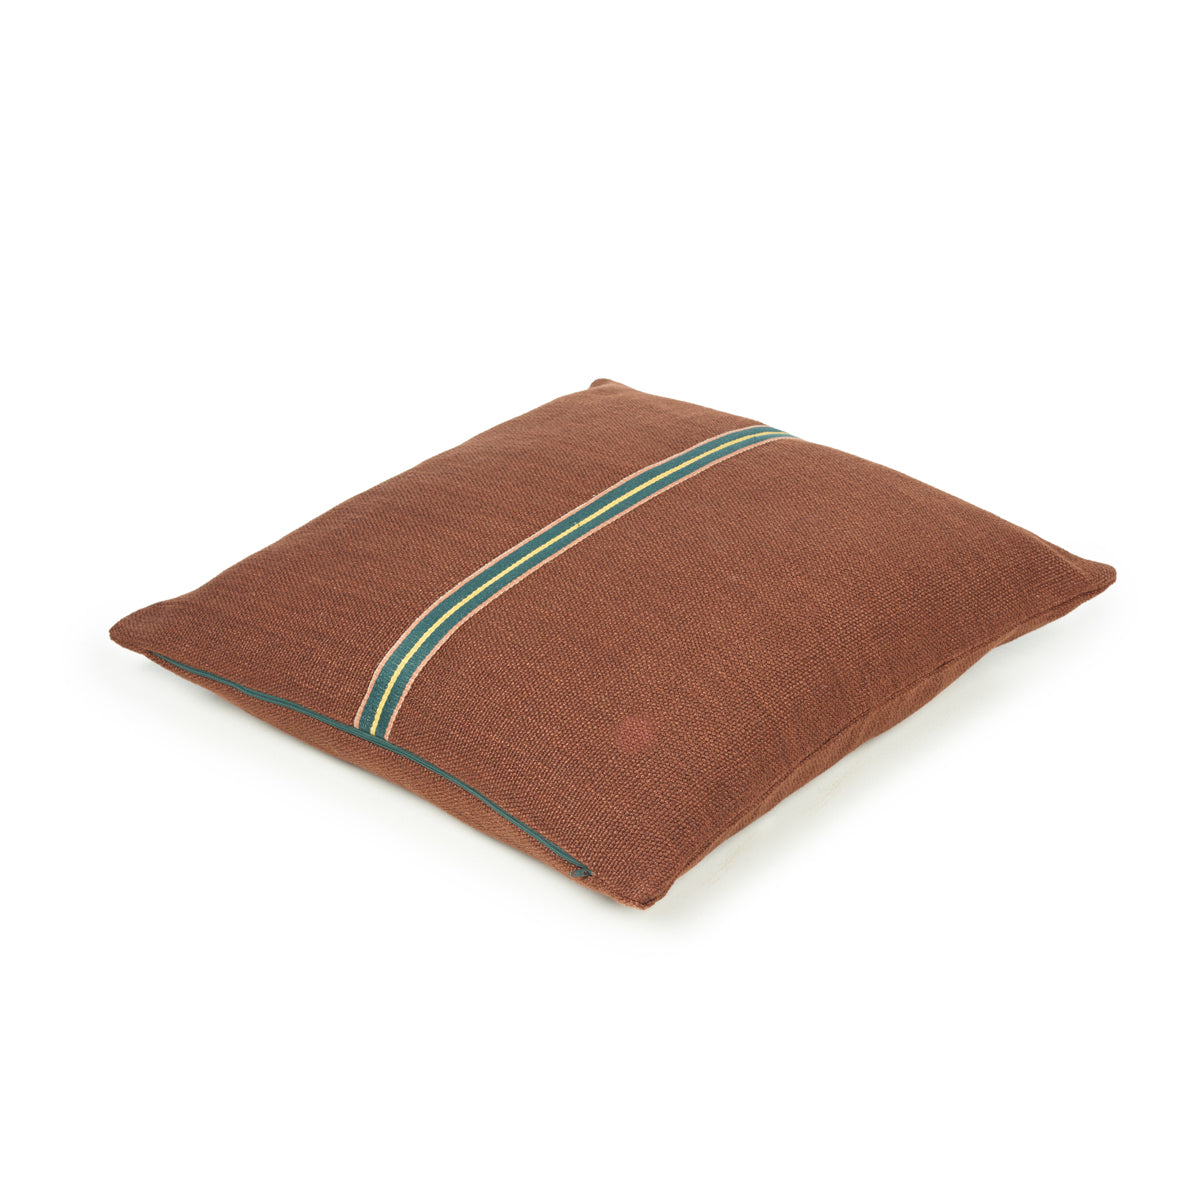 square linen and wool pillow in burnet sienna with green trim stripe down center